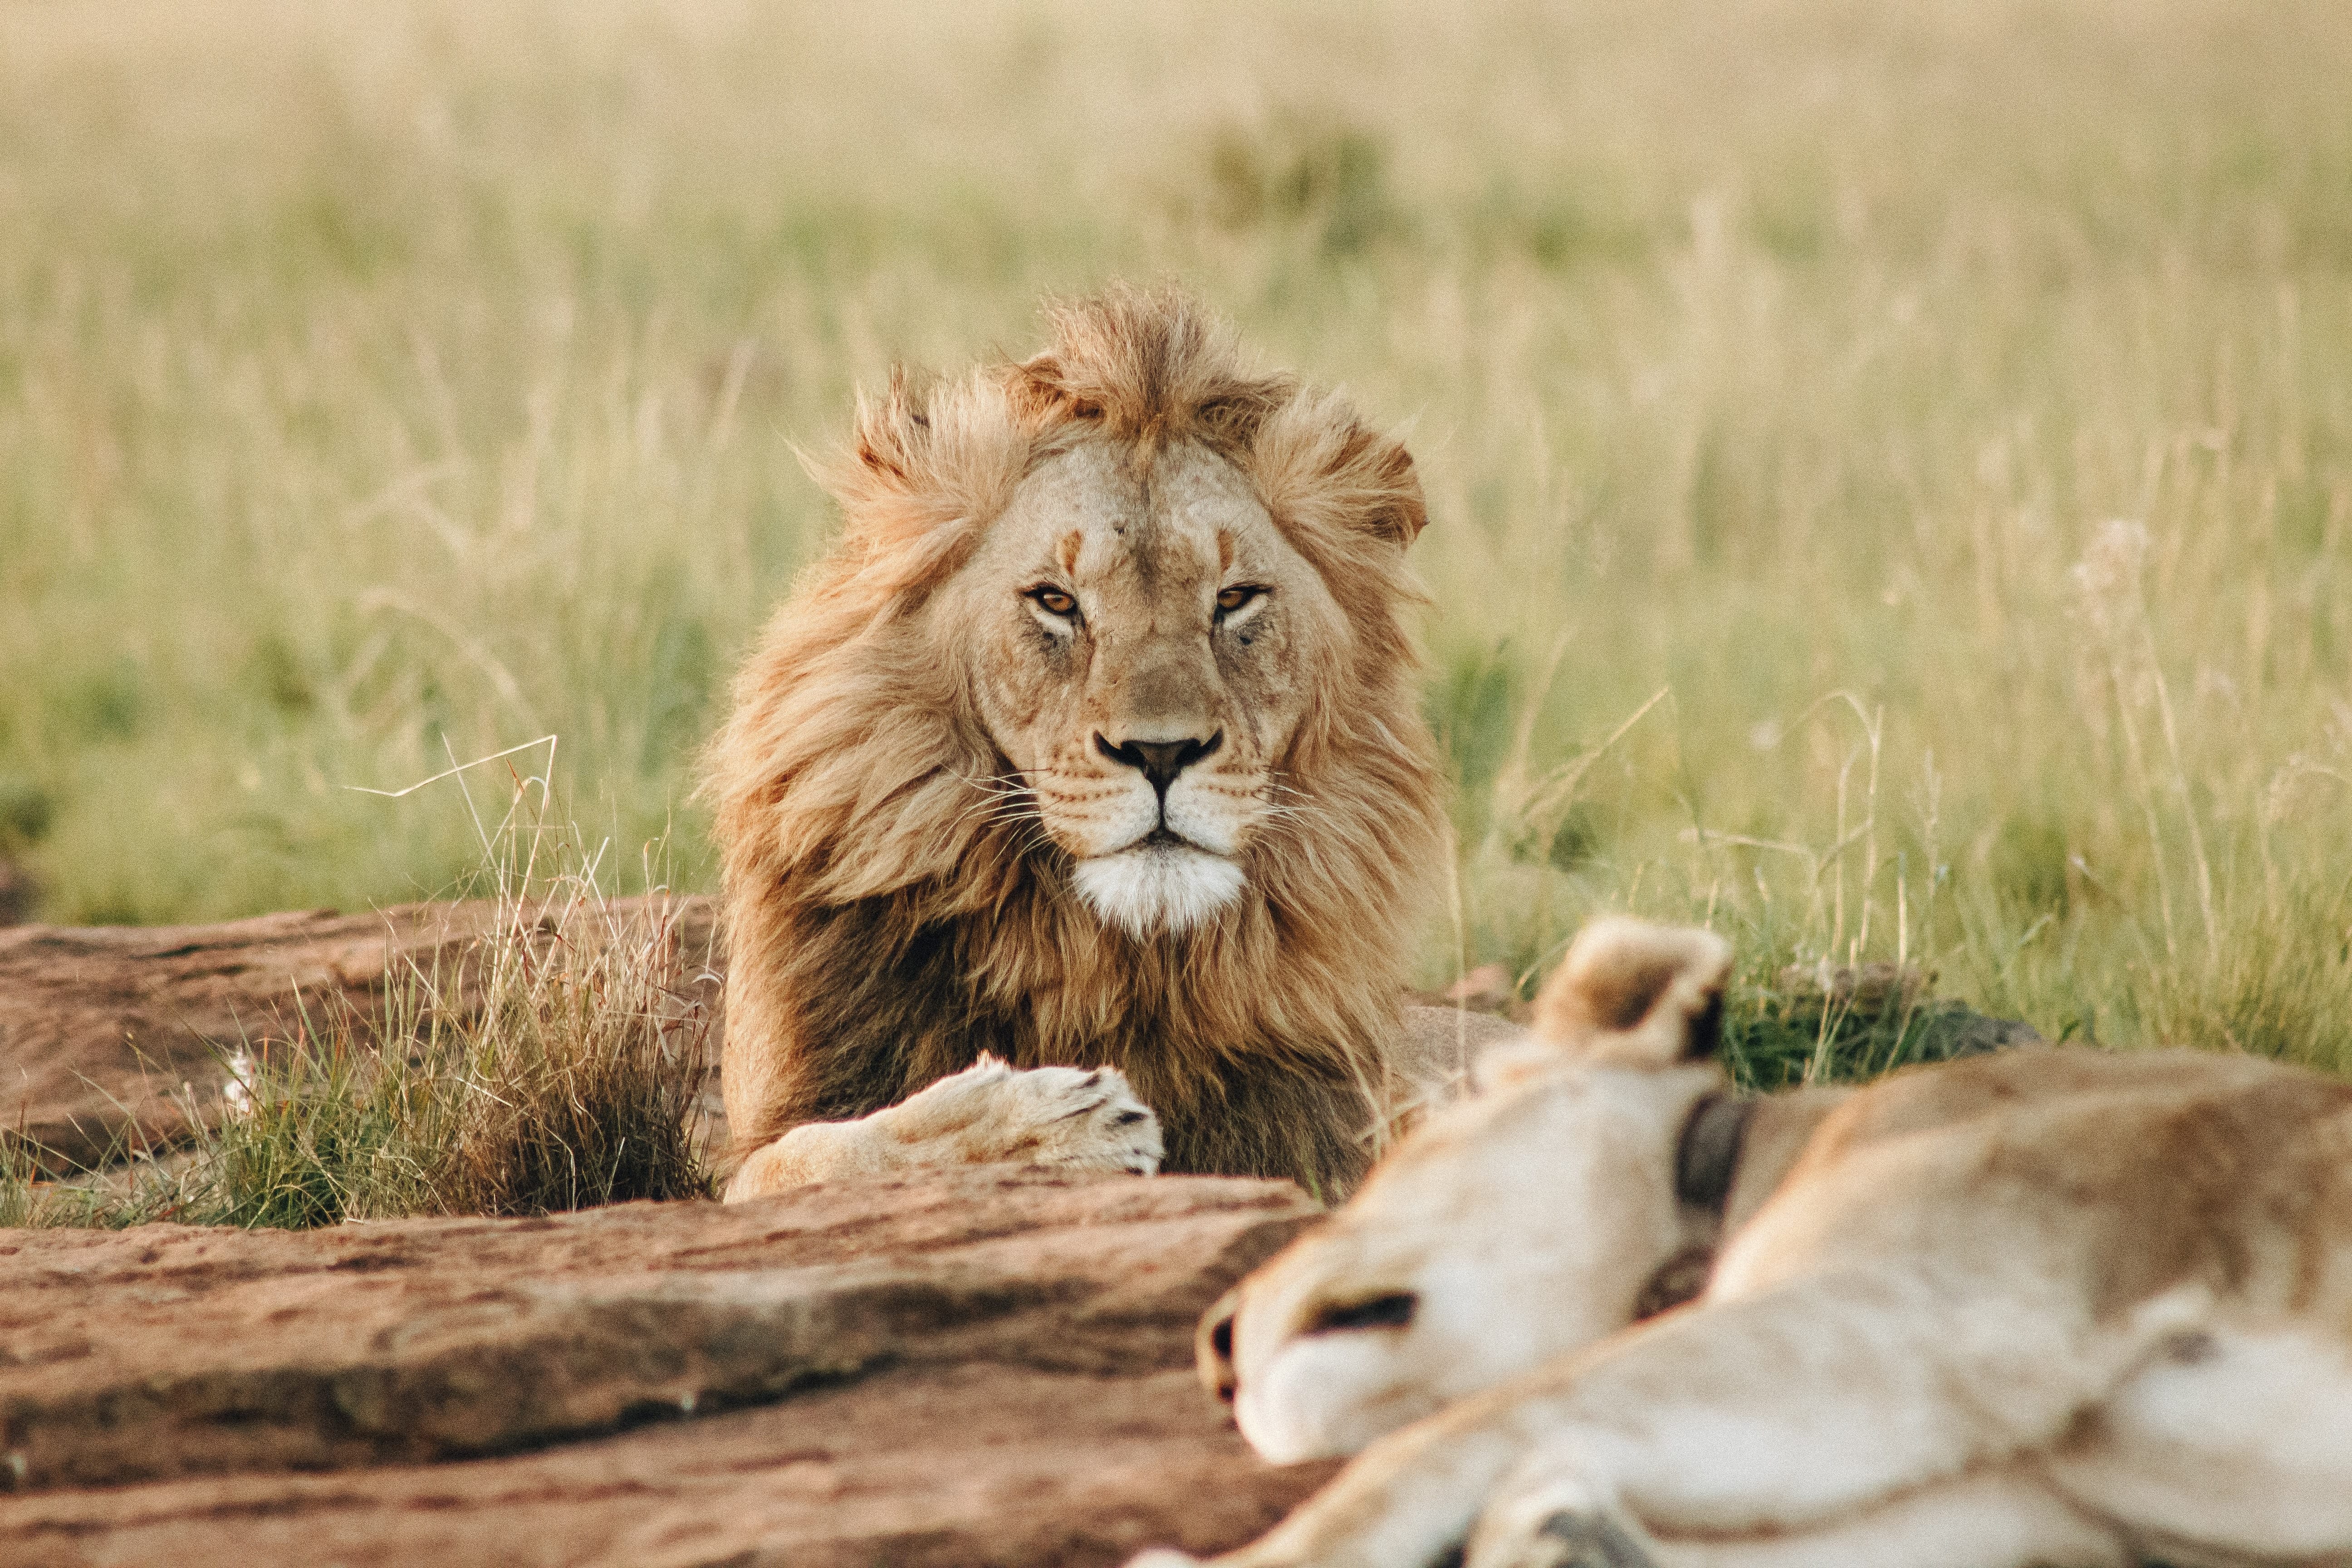 A male lion sits up whilst a lioness sleeps next to him in Africa.